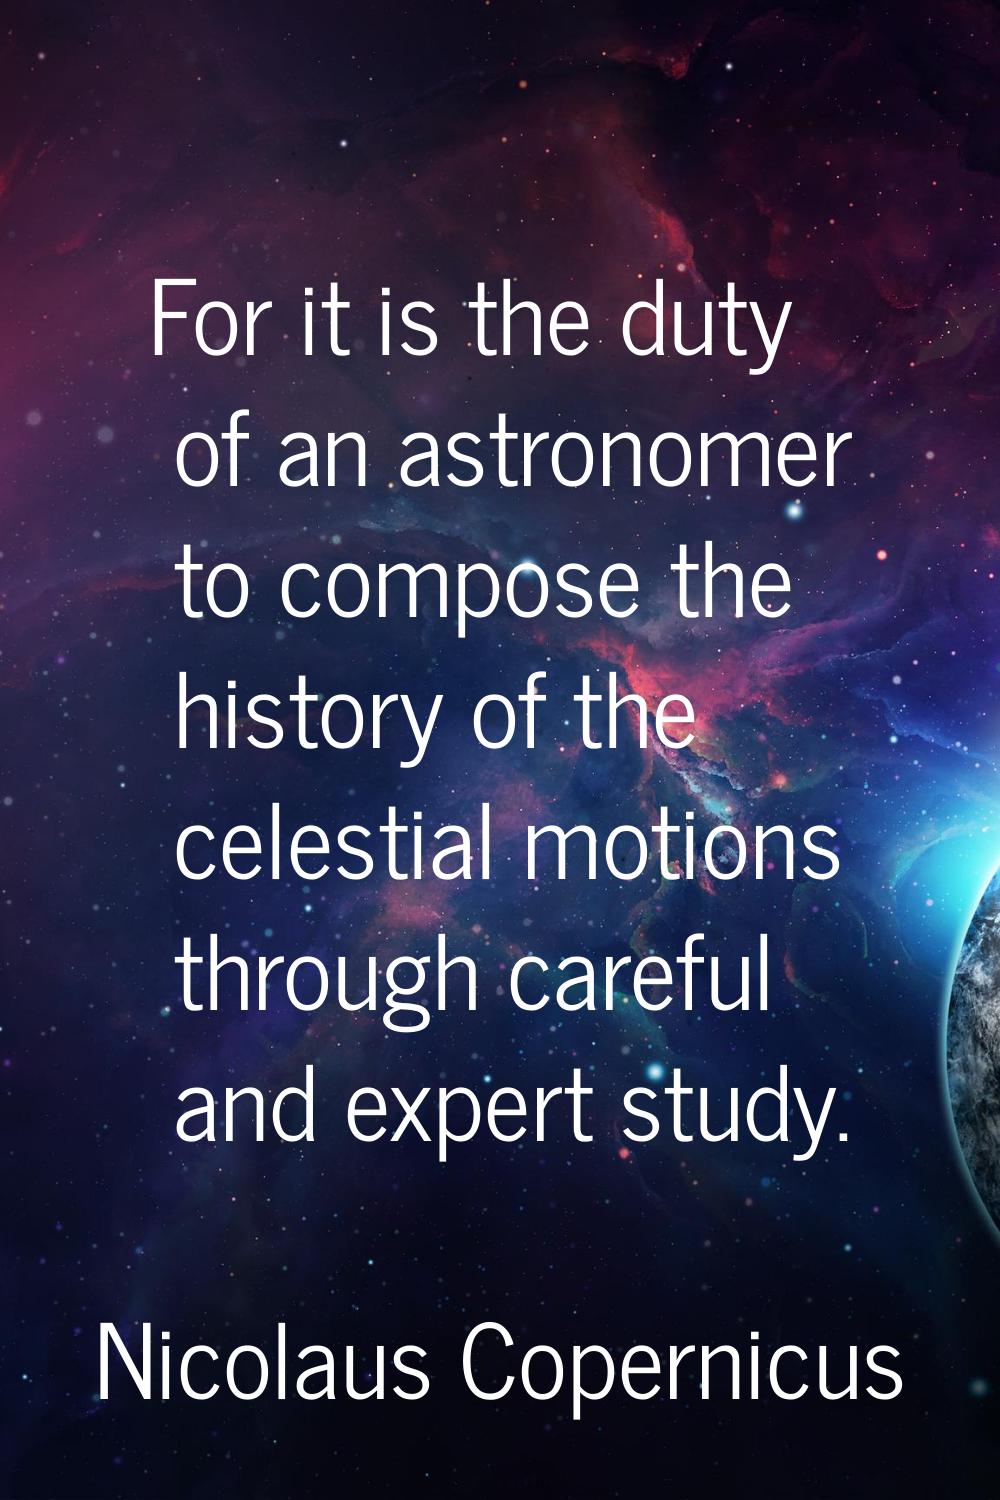 For it is the duty of an astronomer to compose the history of the celestial motions through careful